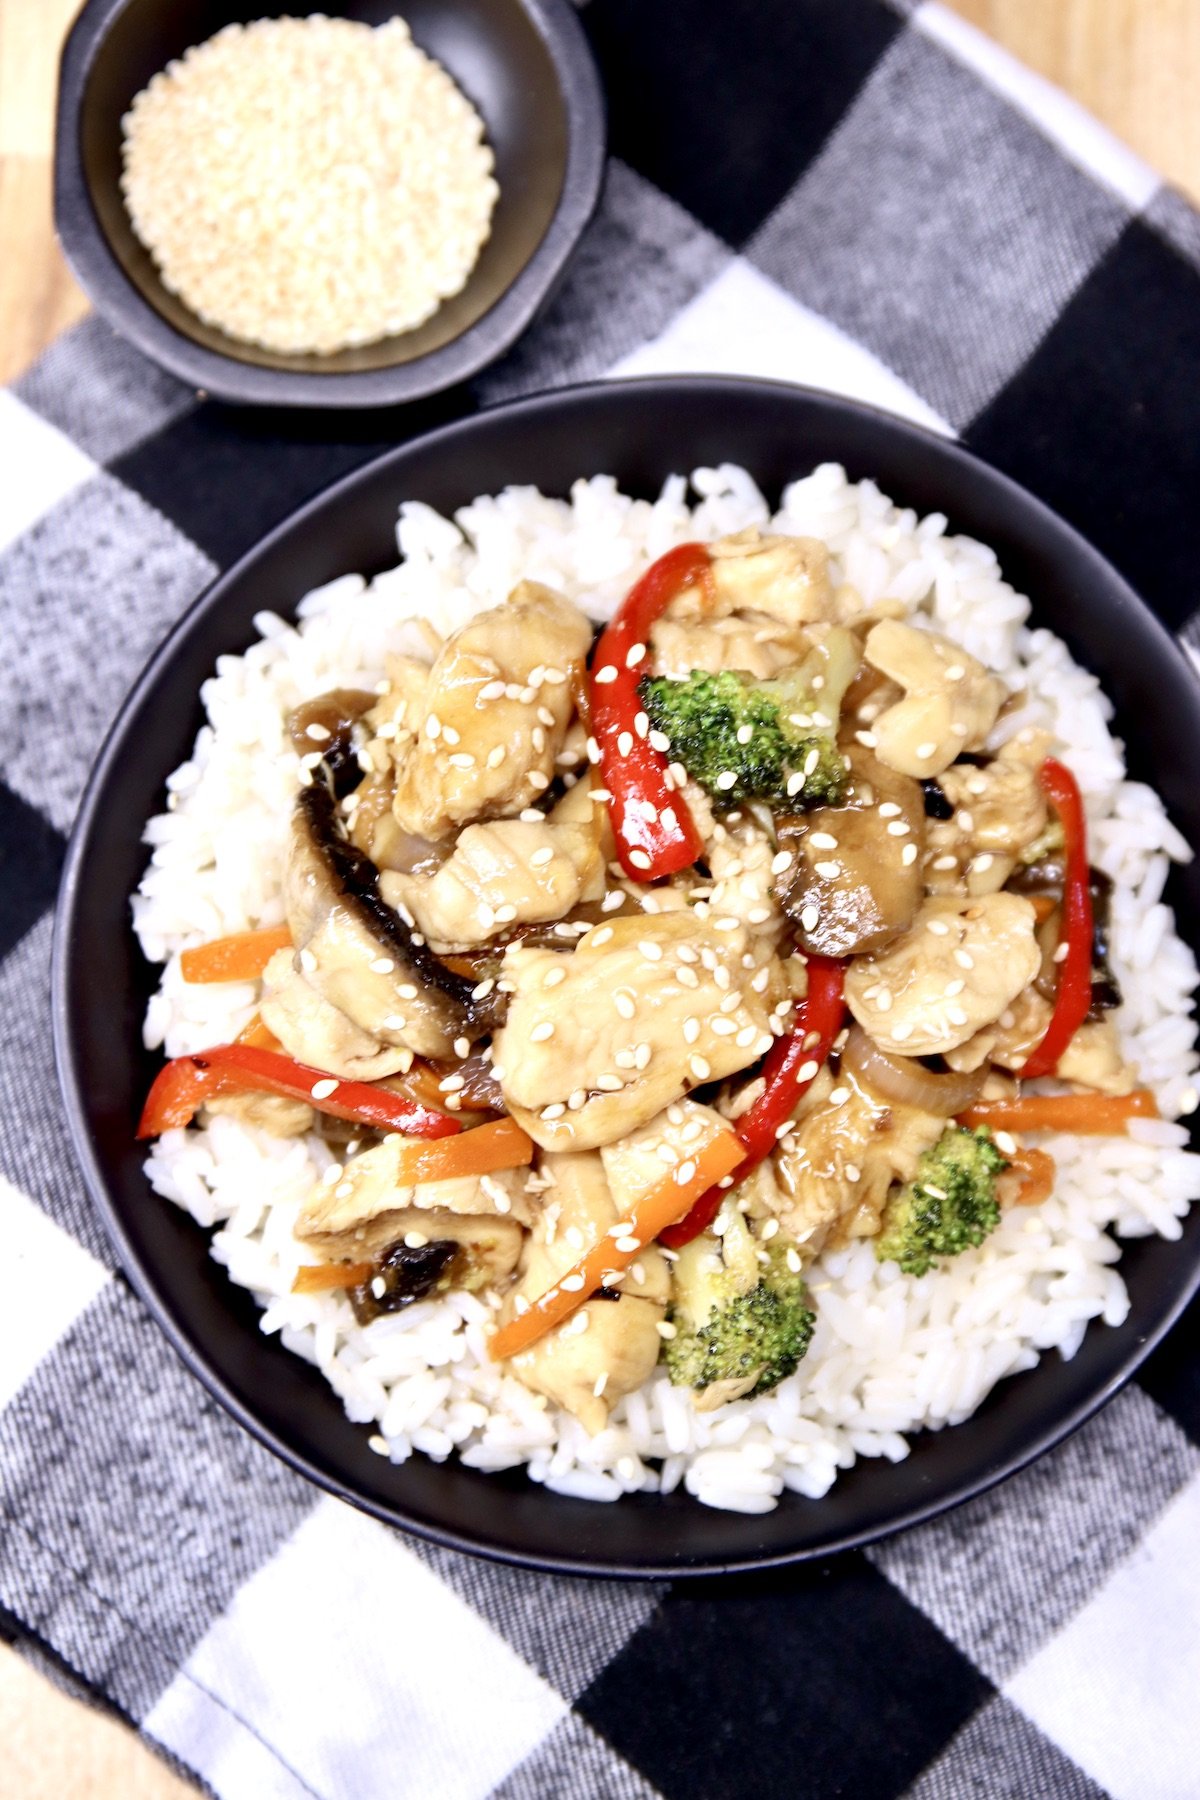 chicken stir fry with sesame seeds over rice in a black bowl, small bowl of sesame seeds